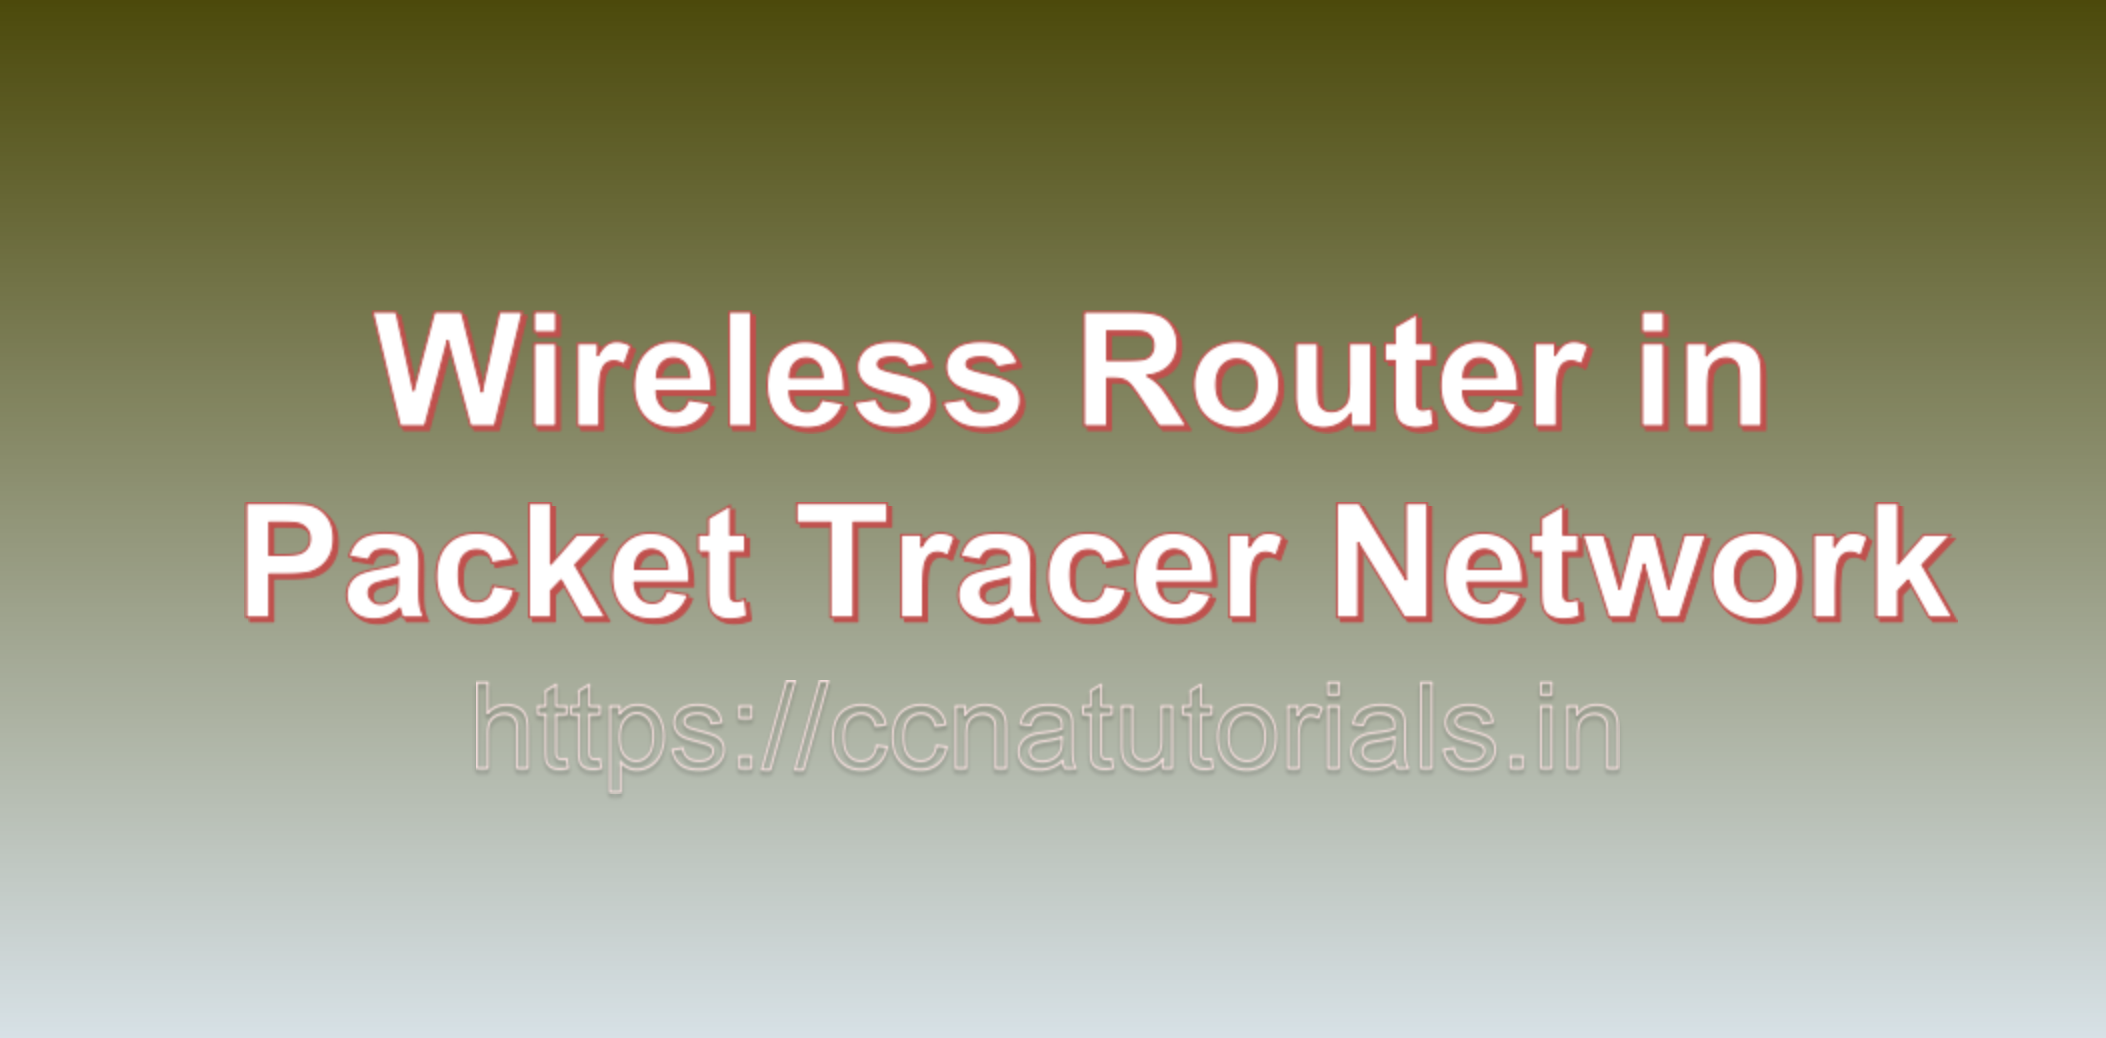 Wireless Router in Packet Tracer Network, ccna, ccna tutorials